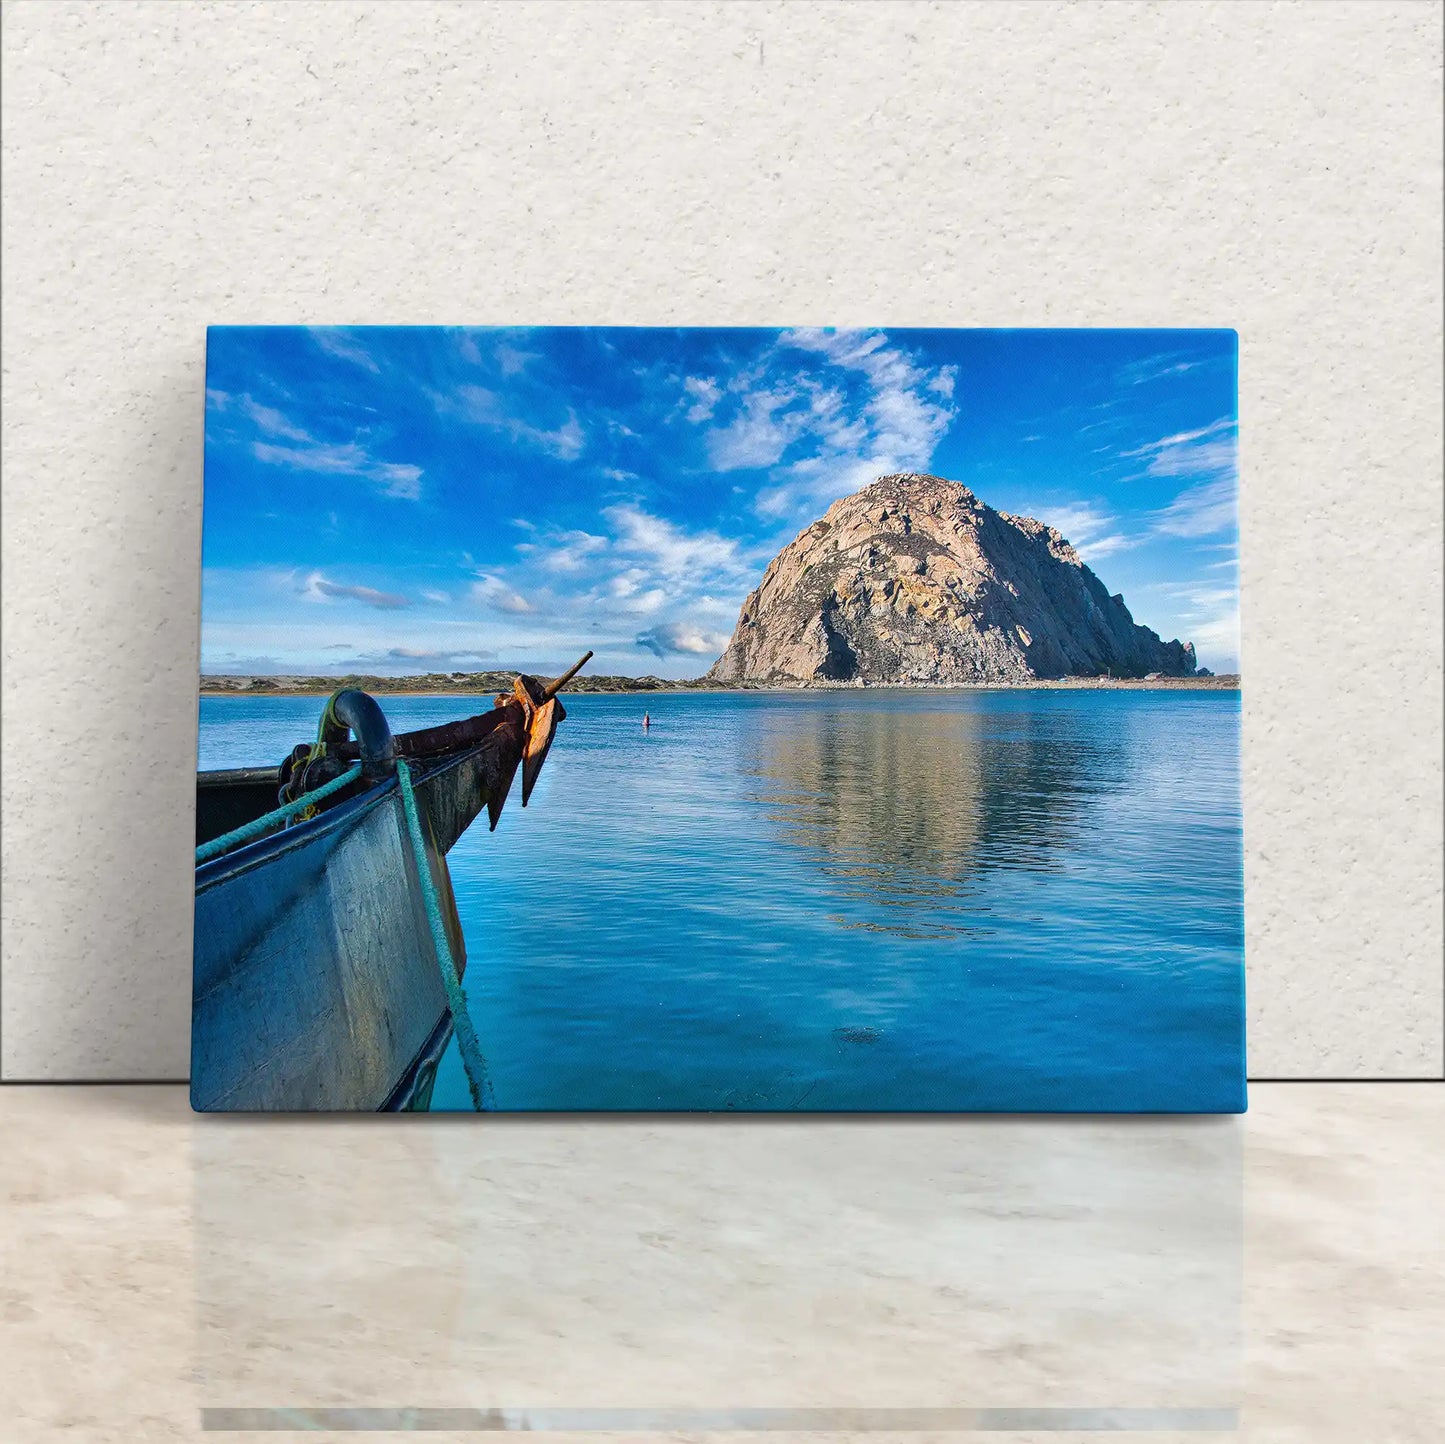 Canvas print of a boat bow aiming at Morro Rock under clear skies, encapsulating the serene essence of Morro Bay, California.